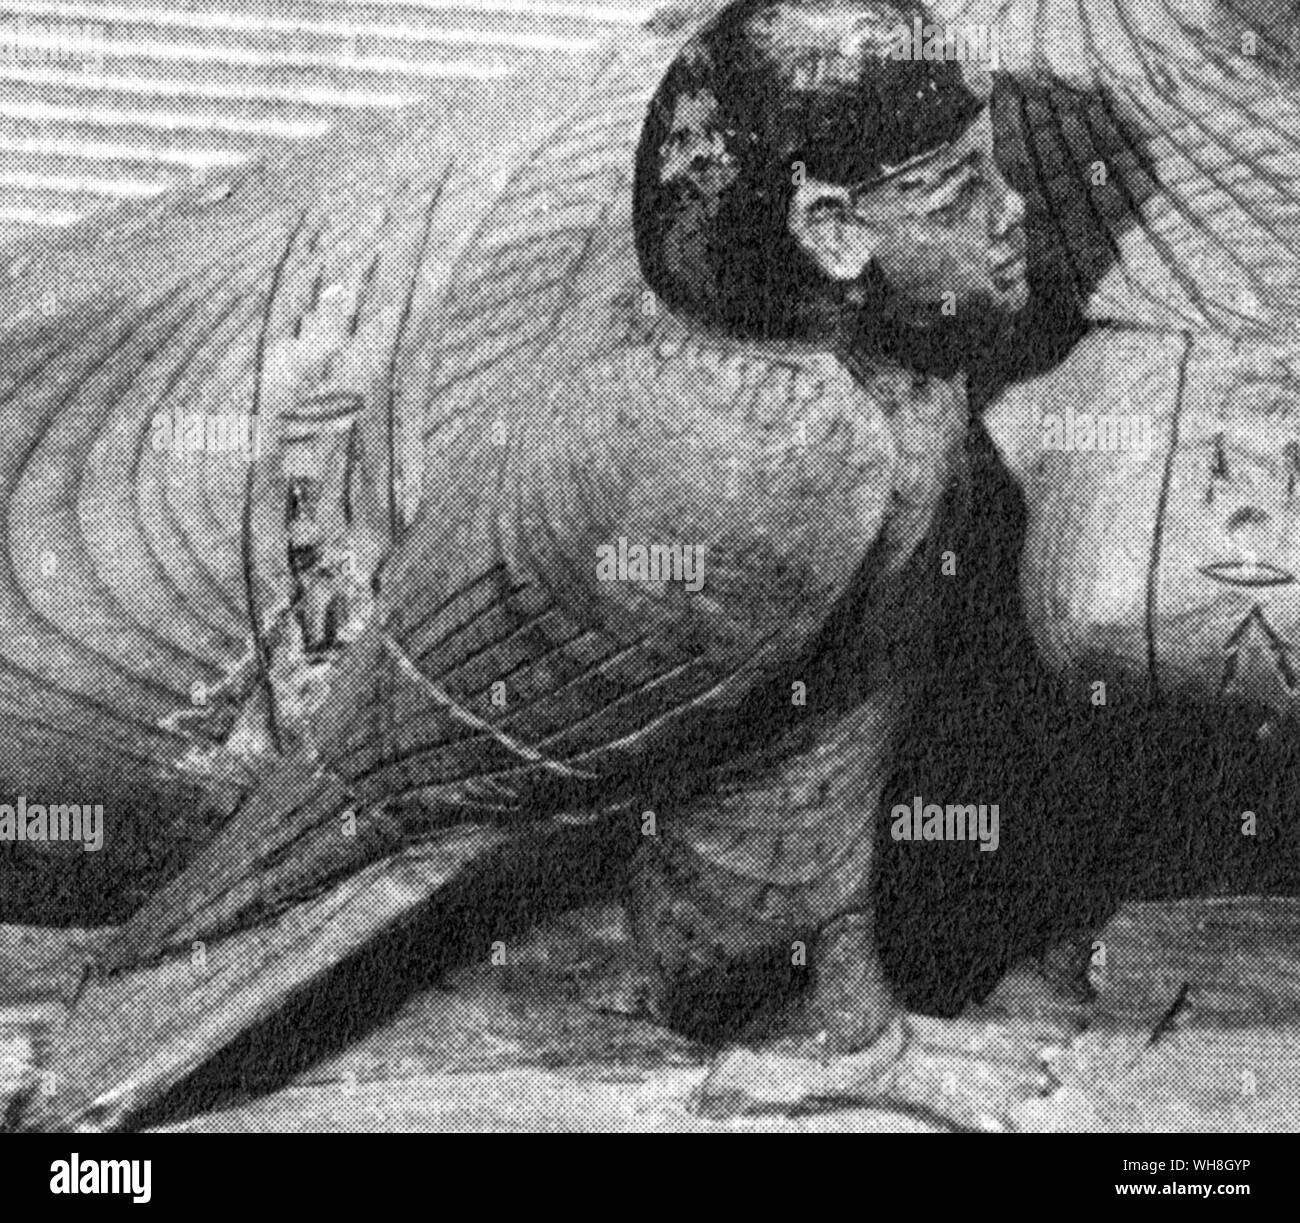 Human headed bird on the miniature effigy of the King lying on a bier. The Treasures of Tutankhamen, The Exhibition Catalogue by I E S Edwards, page 81. Stock Photo